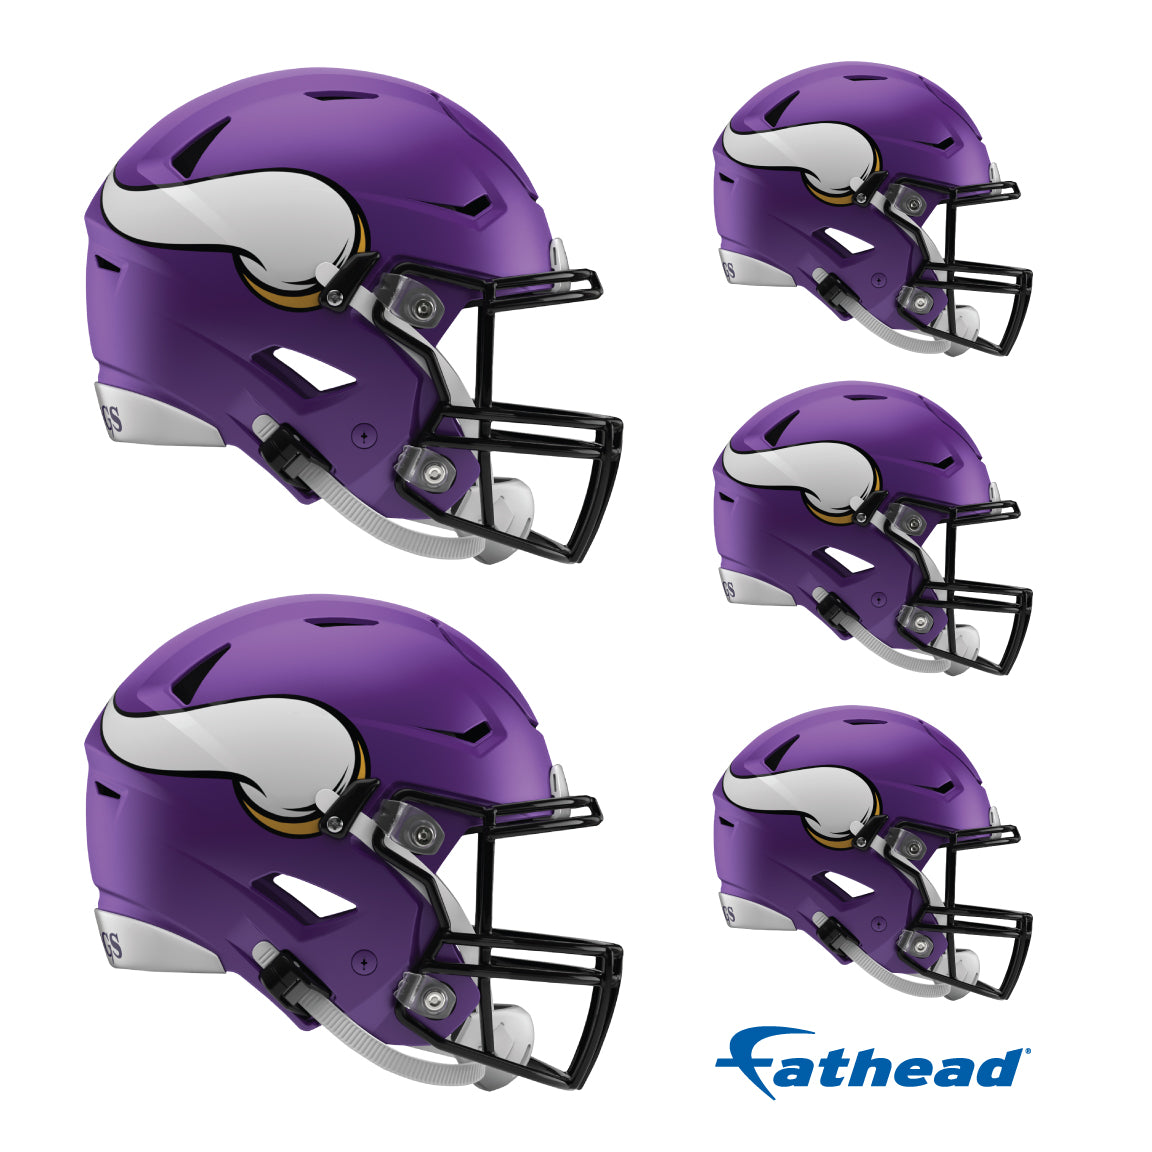 Minnesota Vikings: Helmet Minis - Officially Licensed NFL Removable Adhesive Decal